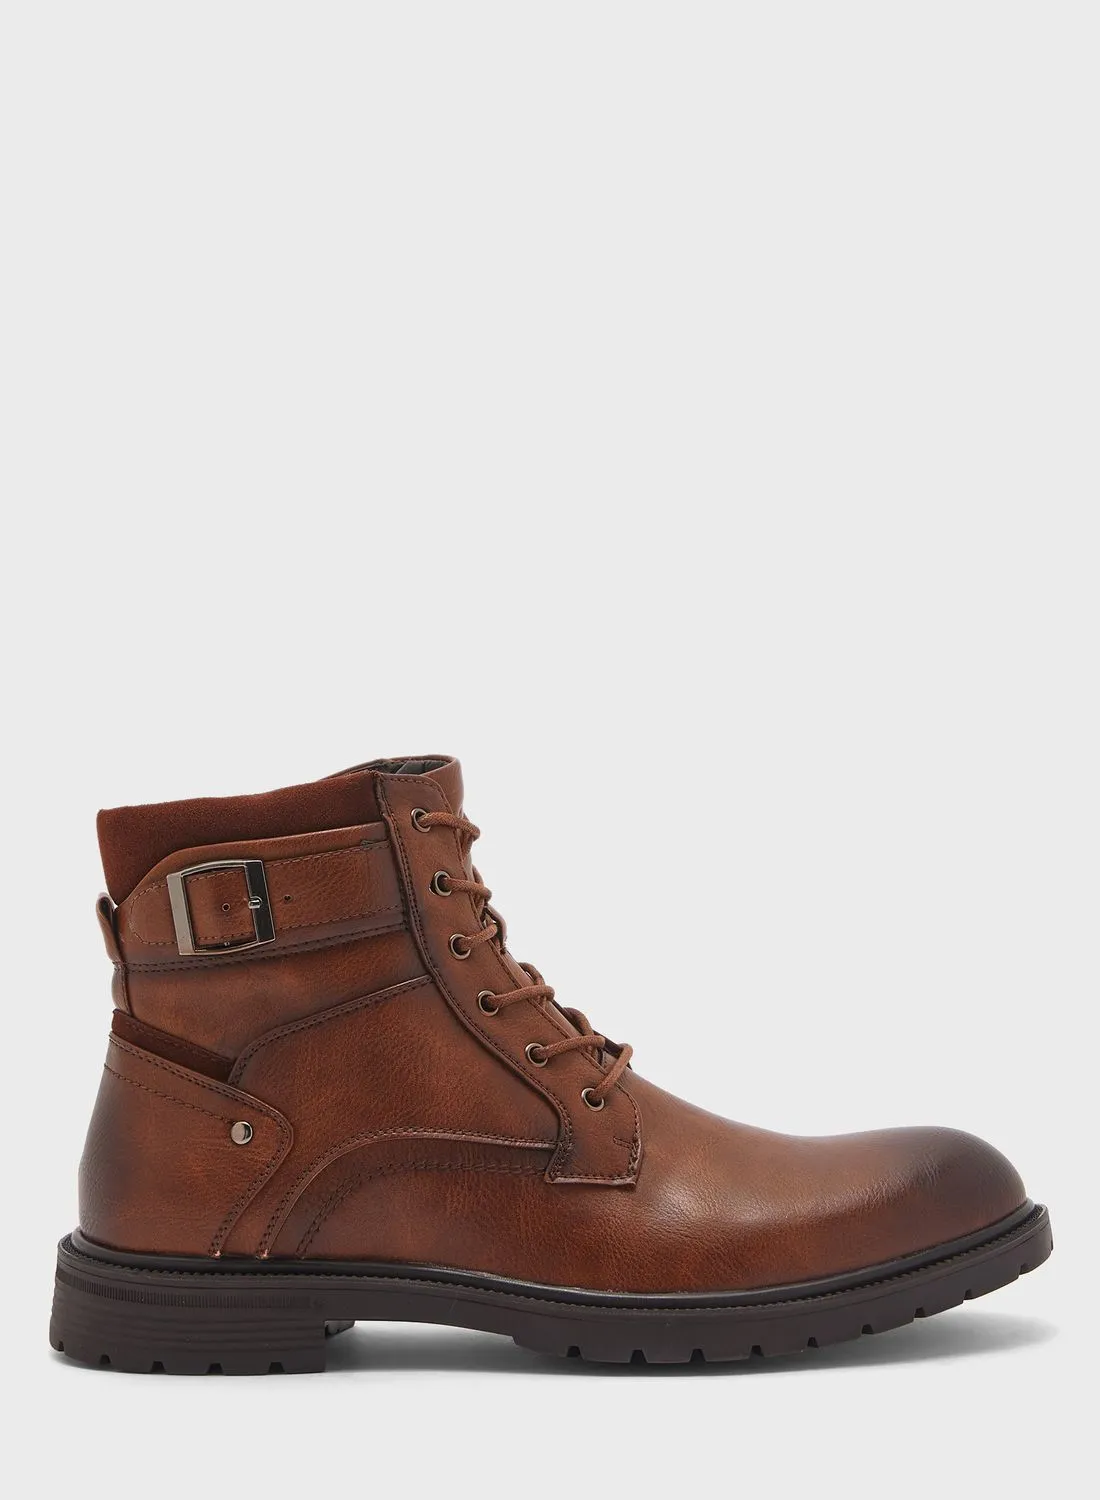 Robert Wood Casual Utility Boots